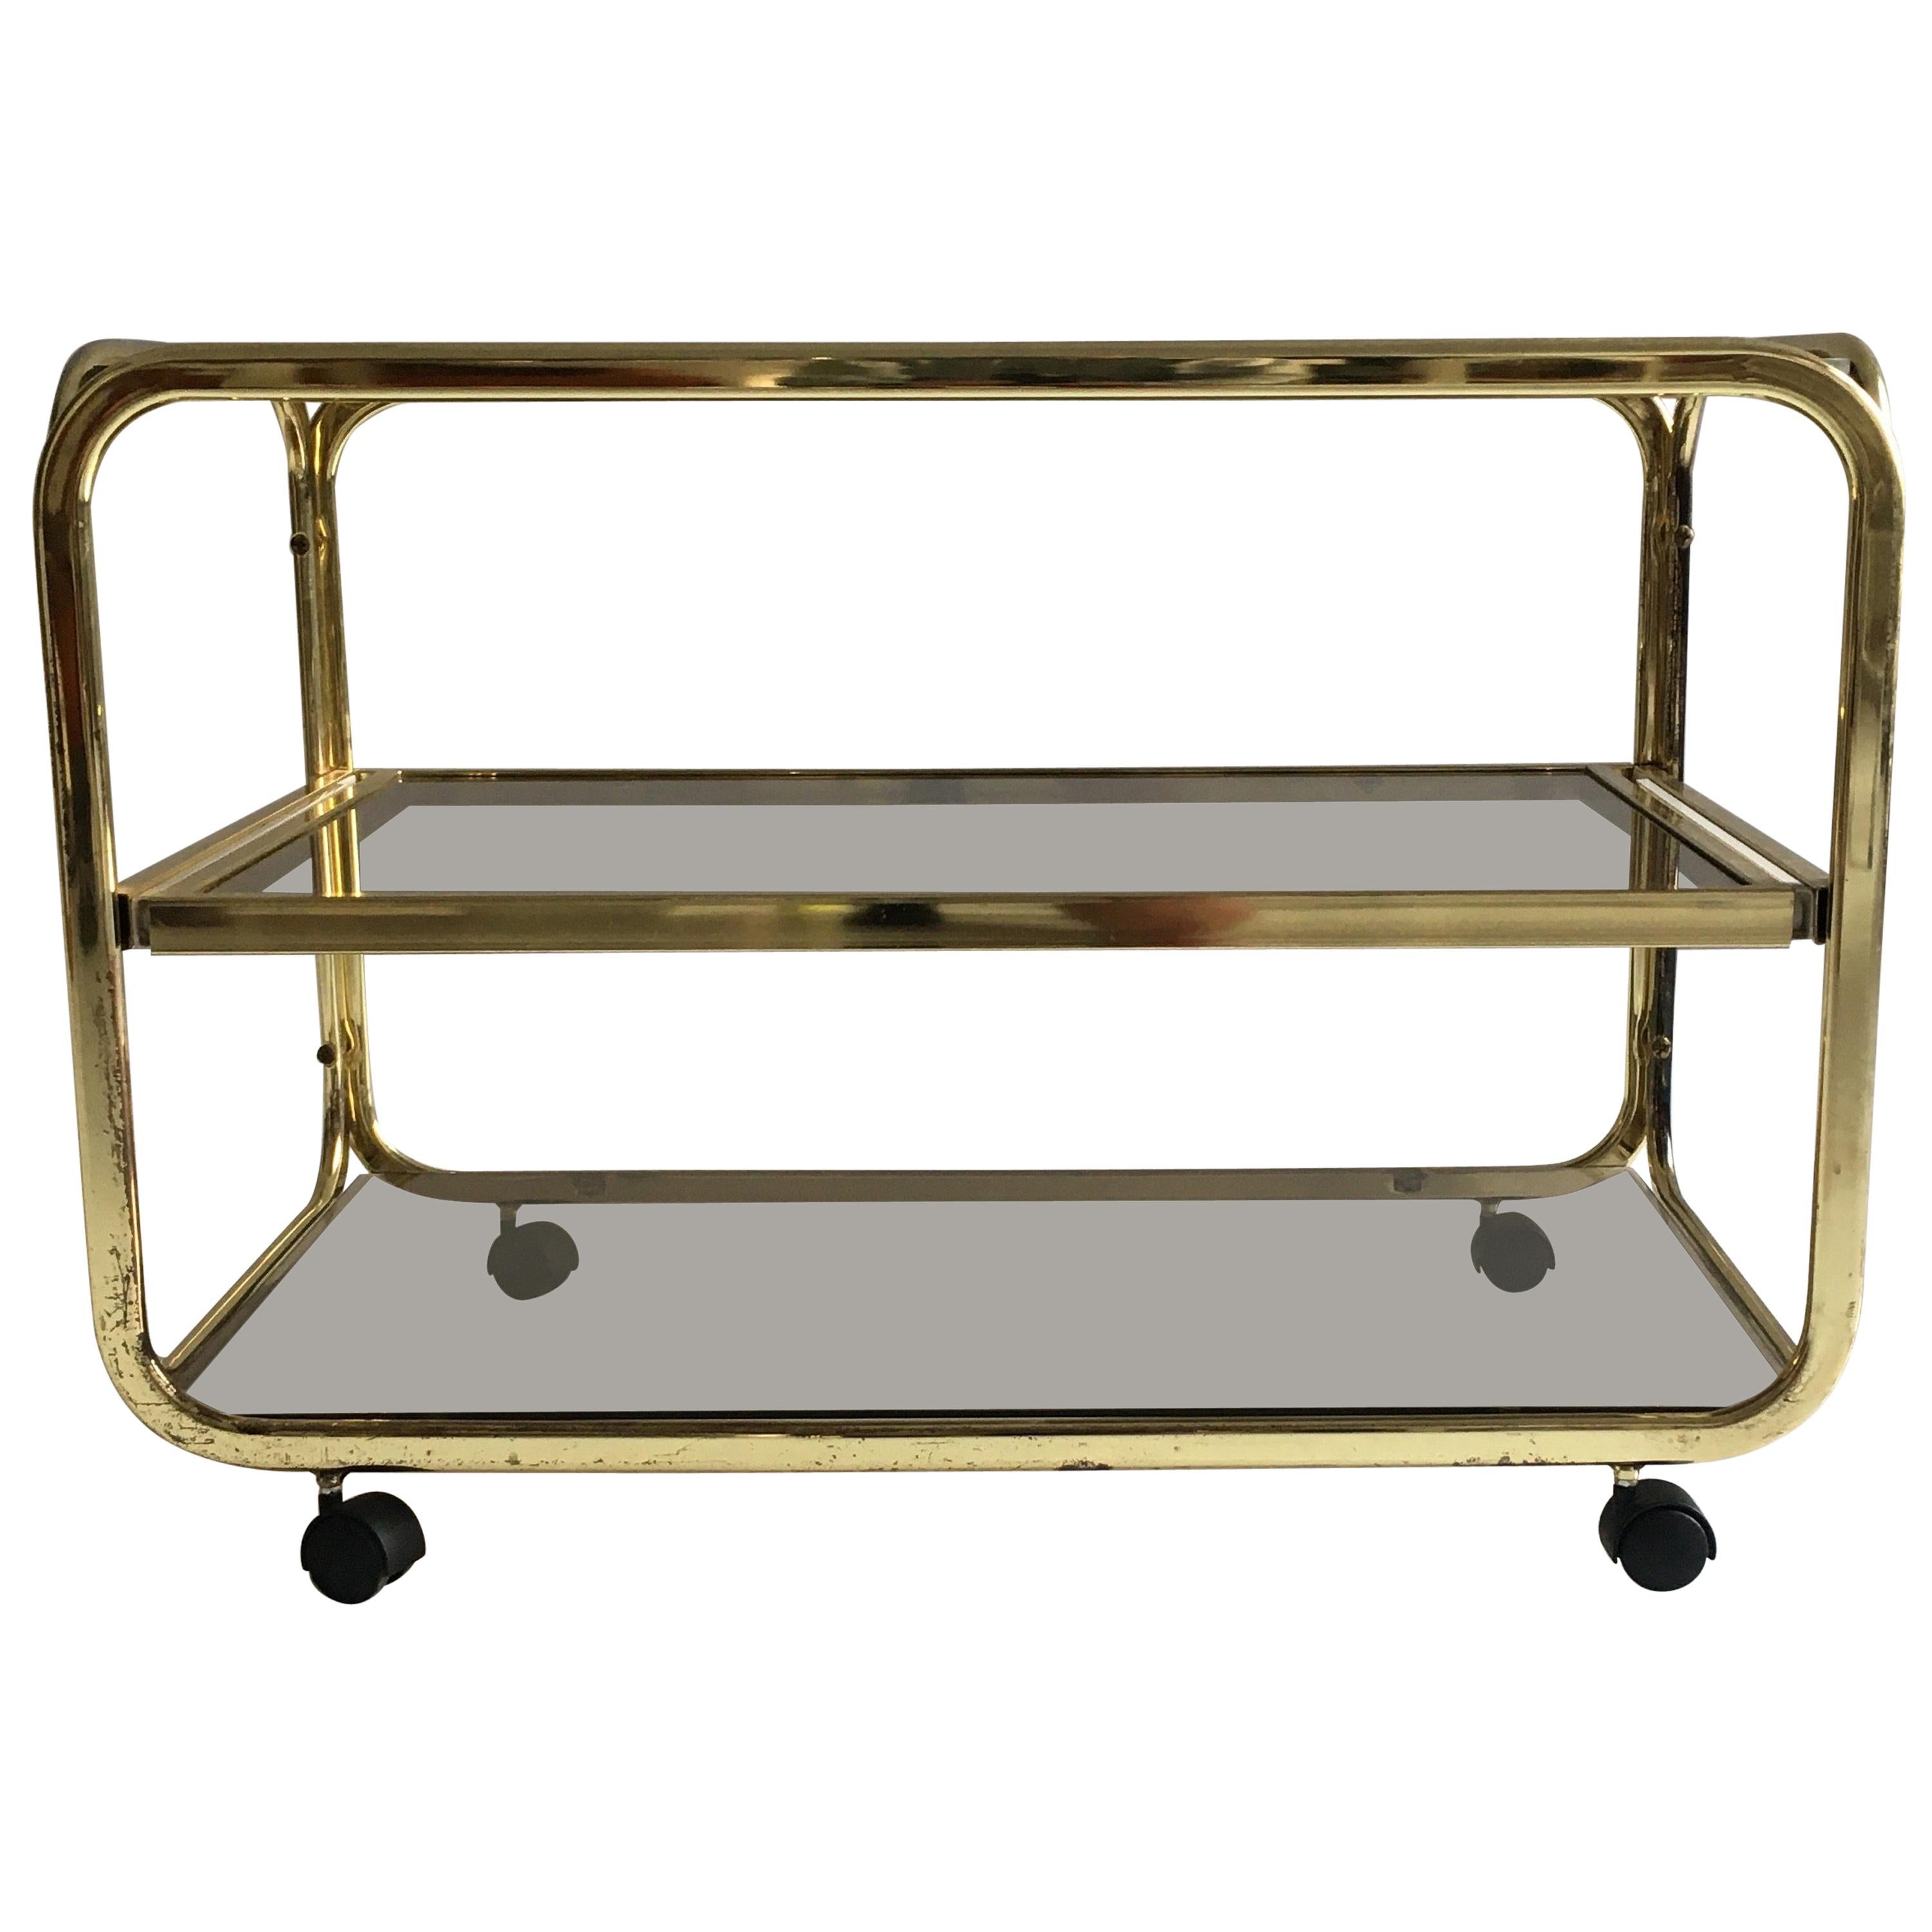 Vintage Brass Plated Bar Cart Table Brown Smoked Glass Plates by Morex, 1970s